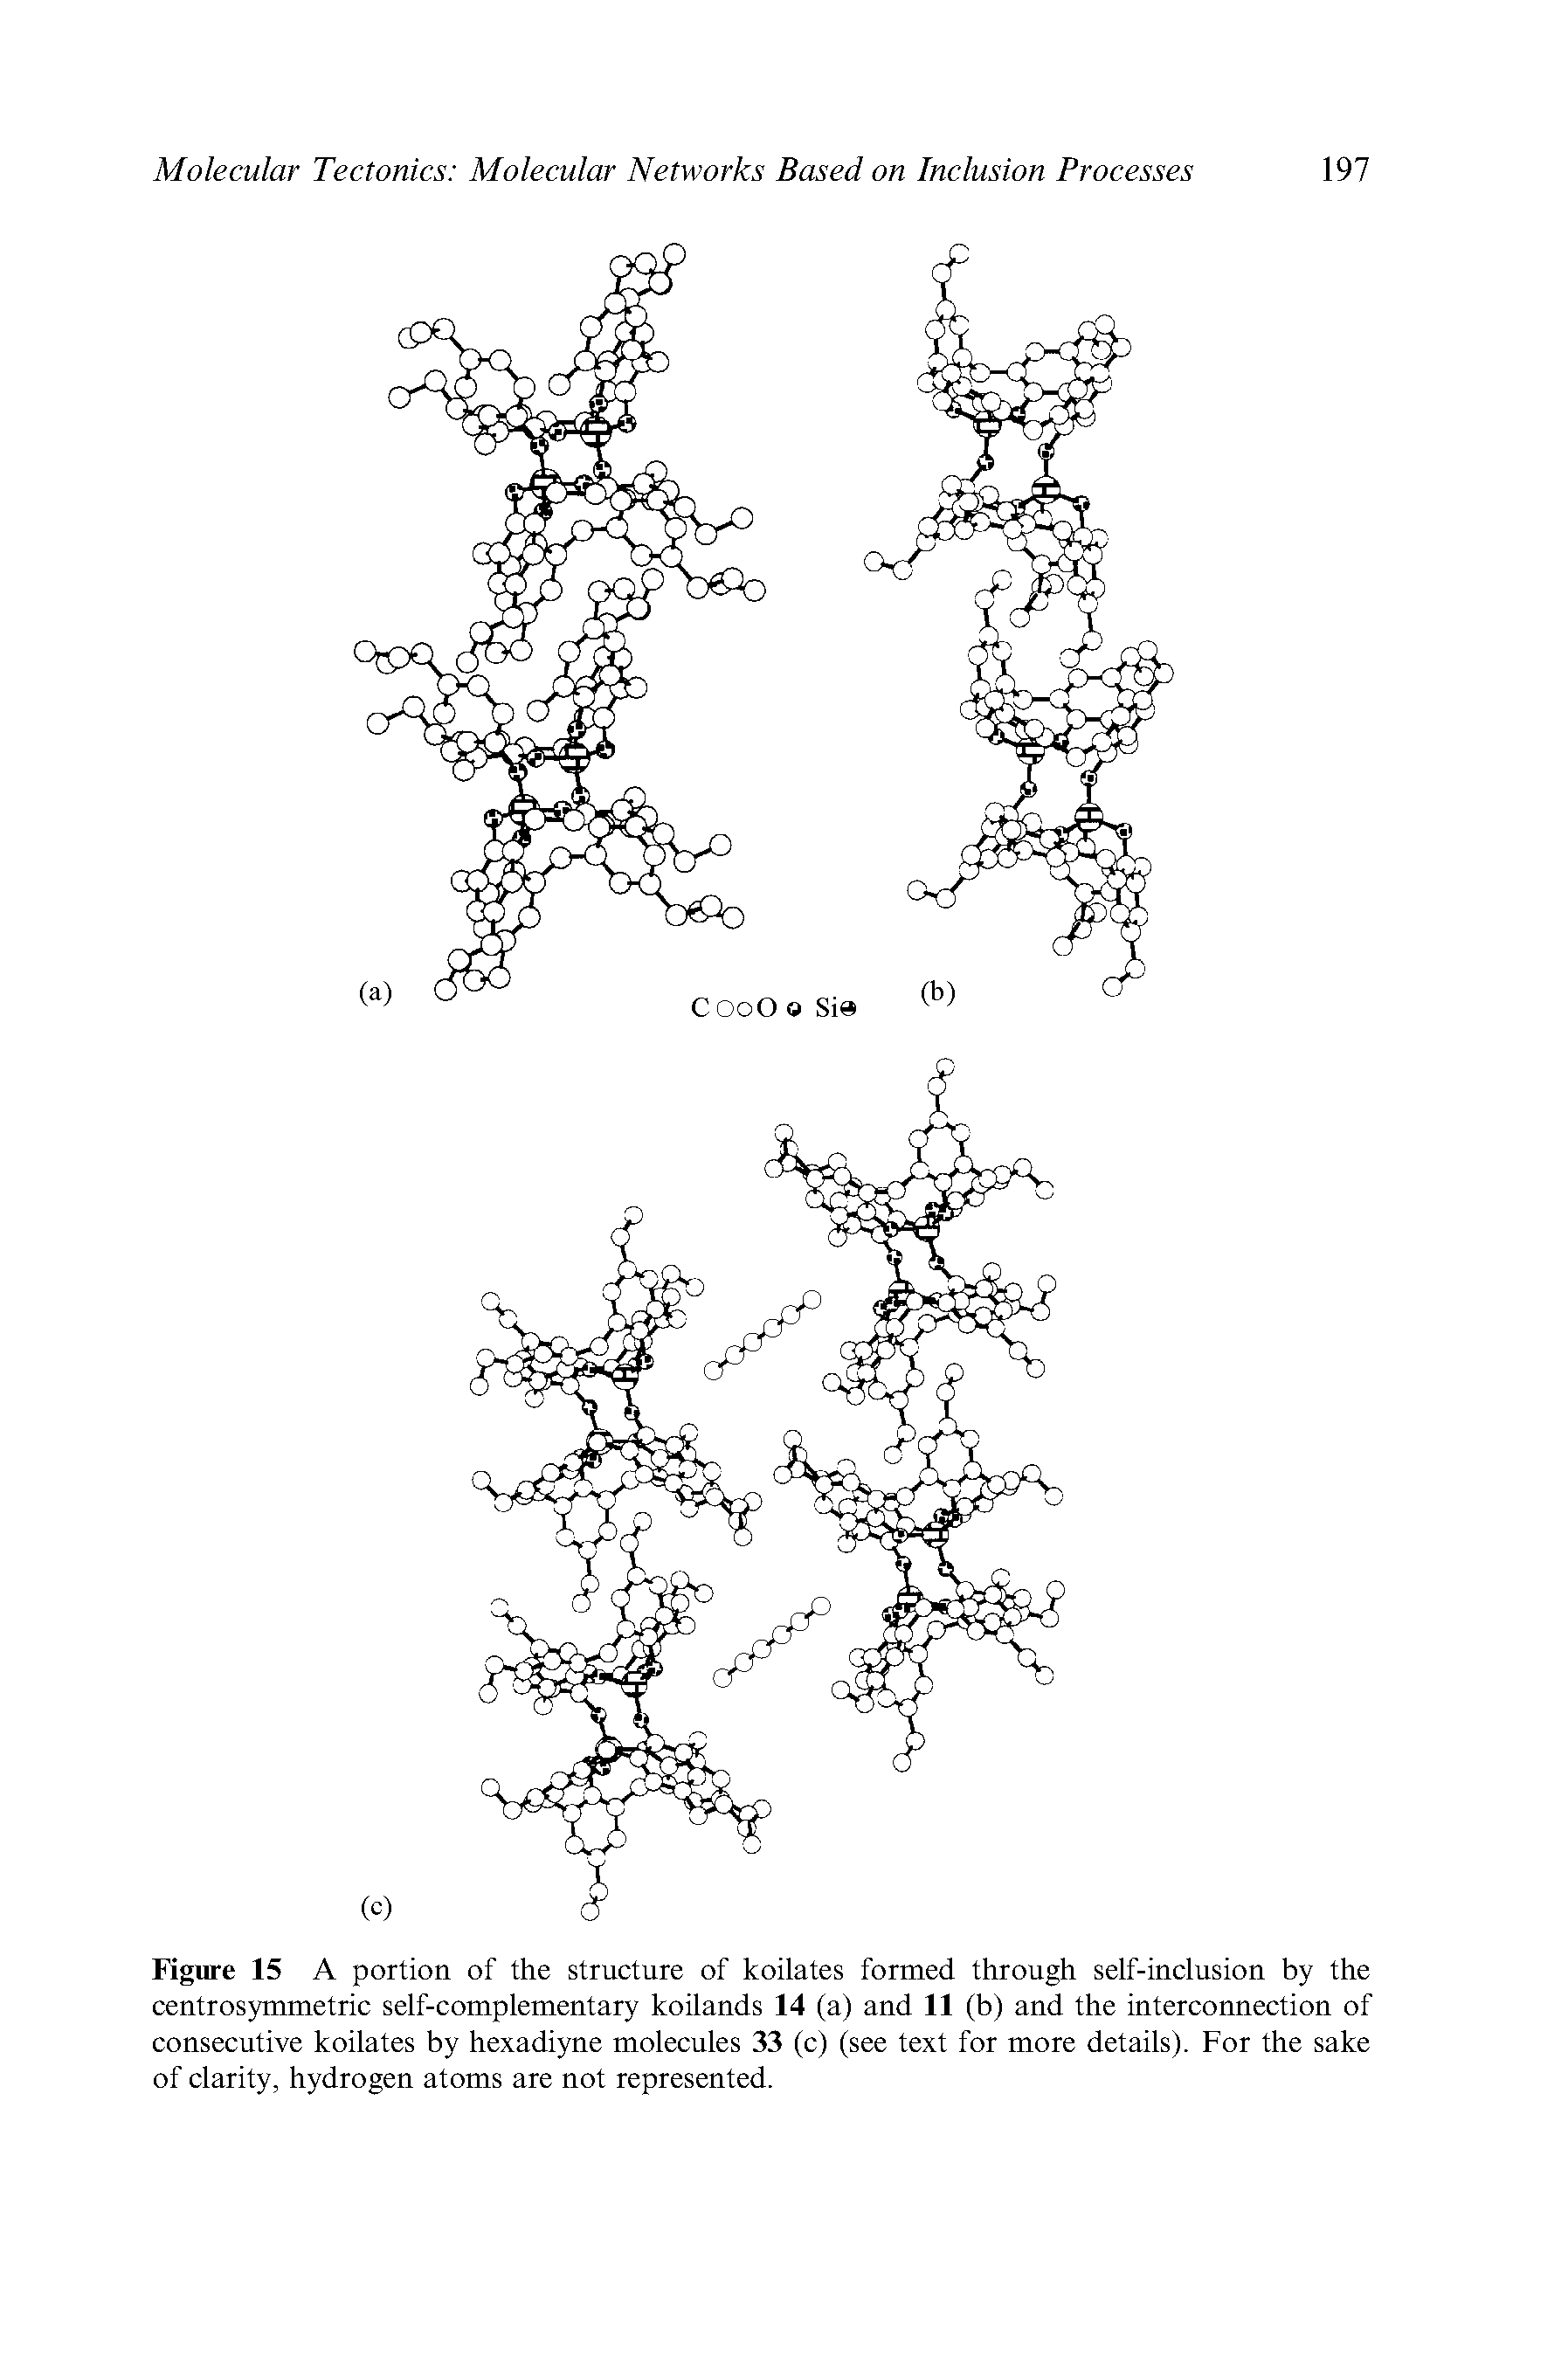 Figure 15 A portion of the structure of koilates formed through self-inclusion by the centrosymmetric self-complementary koilands 14 (a) and 11 (b) and the interconnection of consecutive koilates by hexadiyne molecules 33 (c) (see text for more details). For the sake of clarity, hydrogen atoms are not represented.